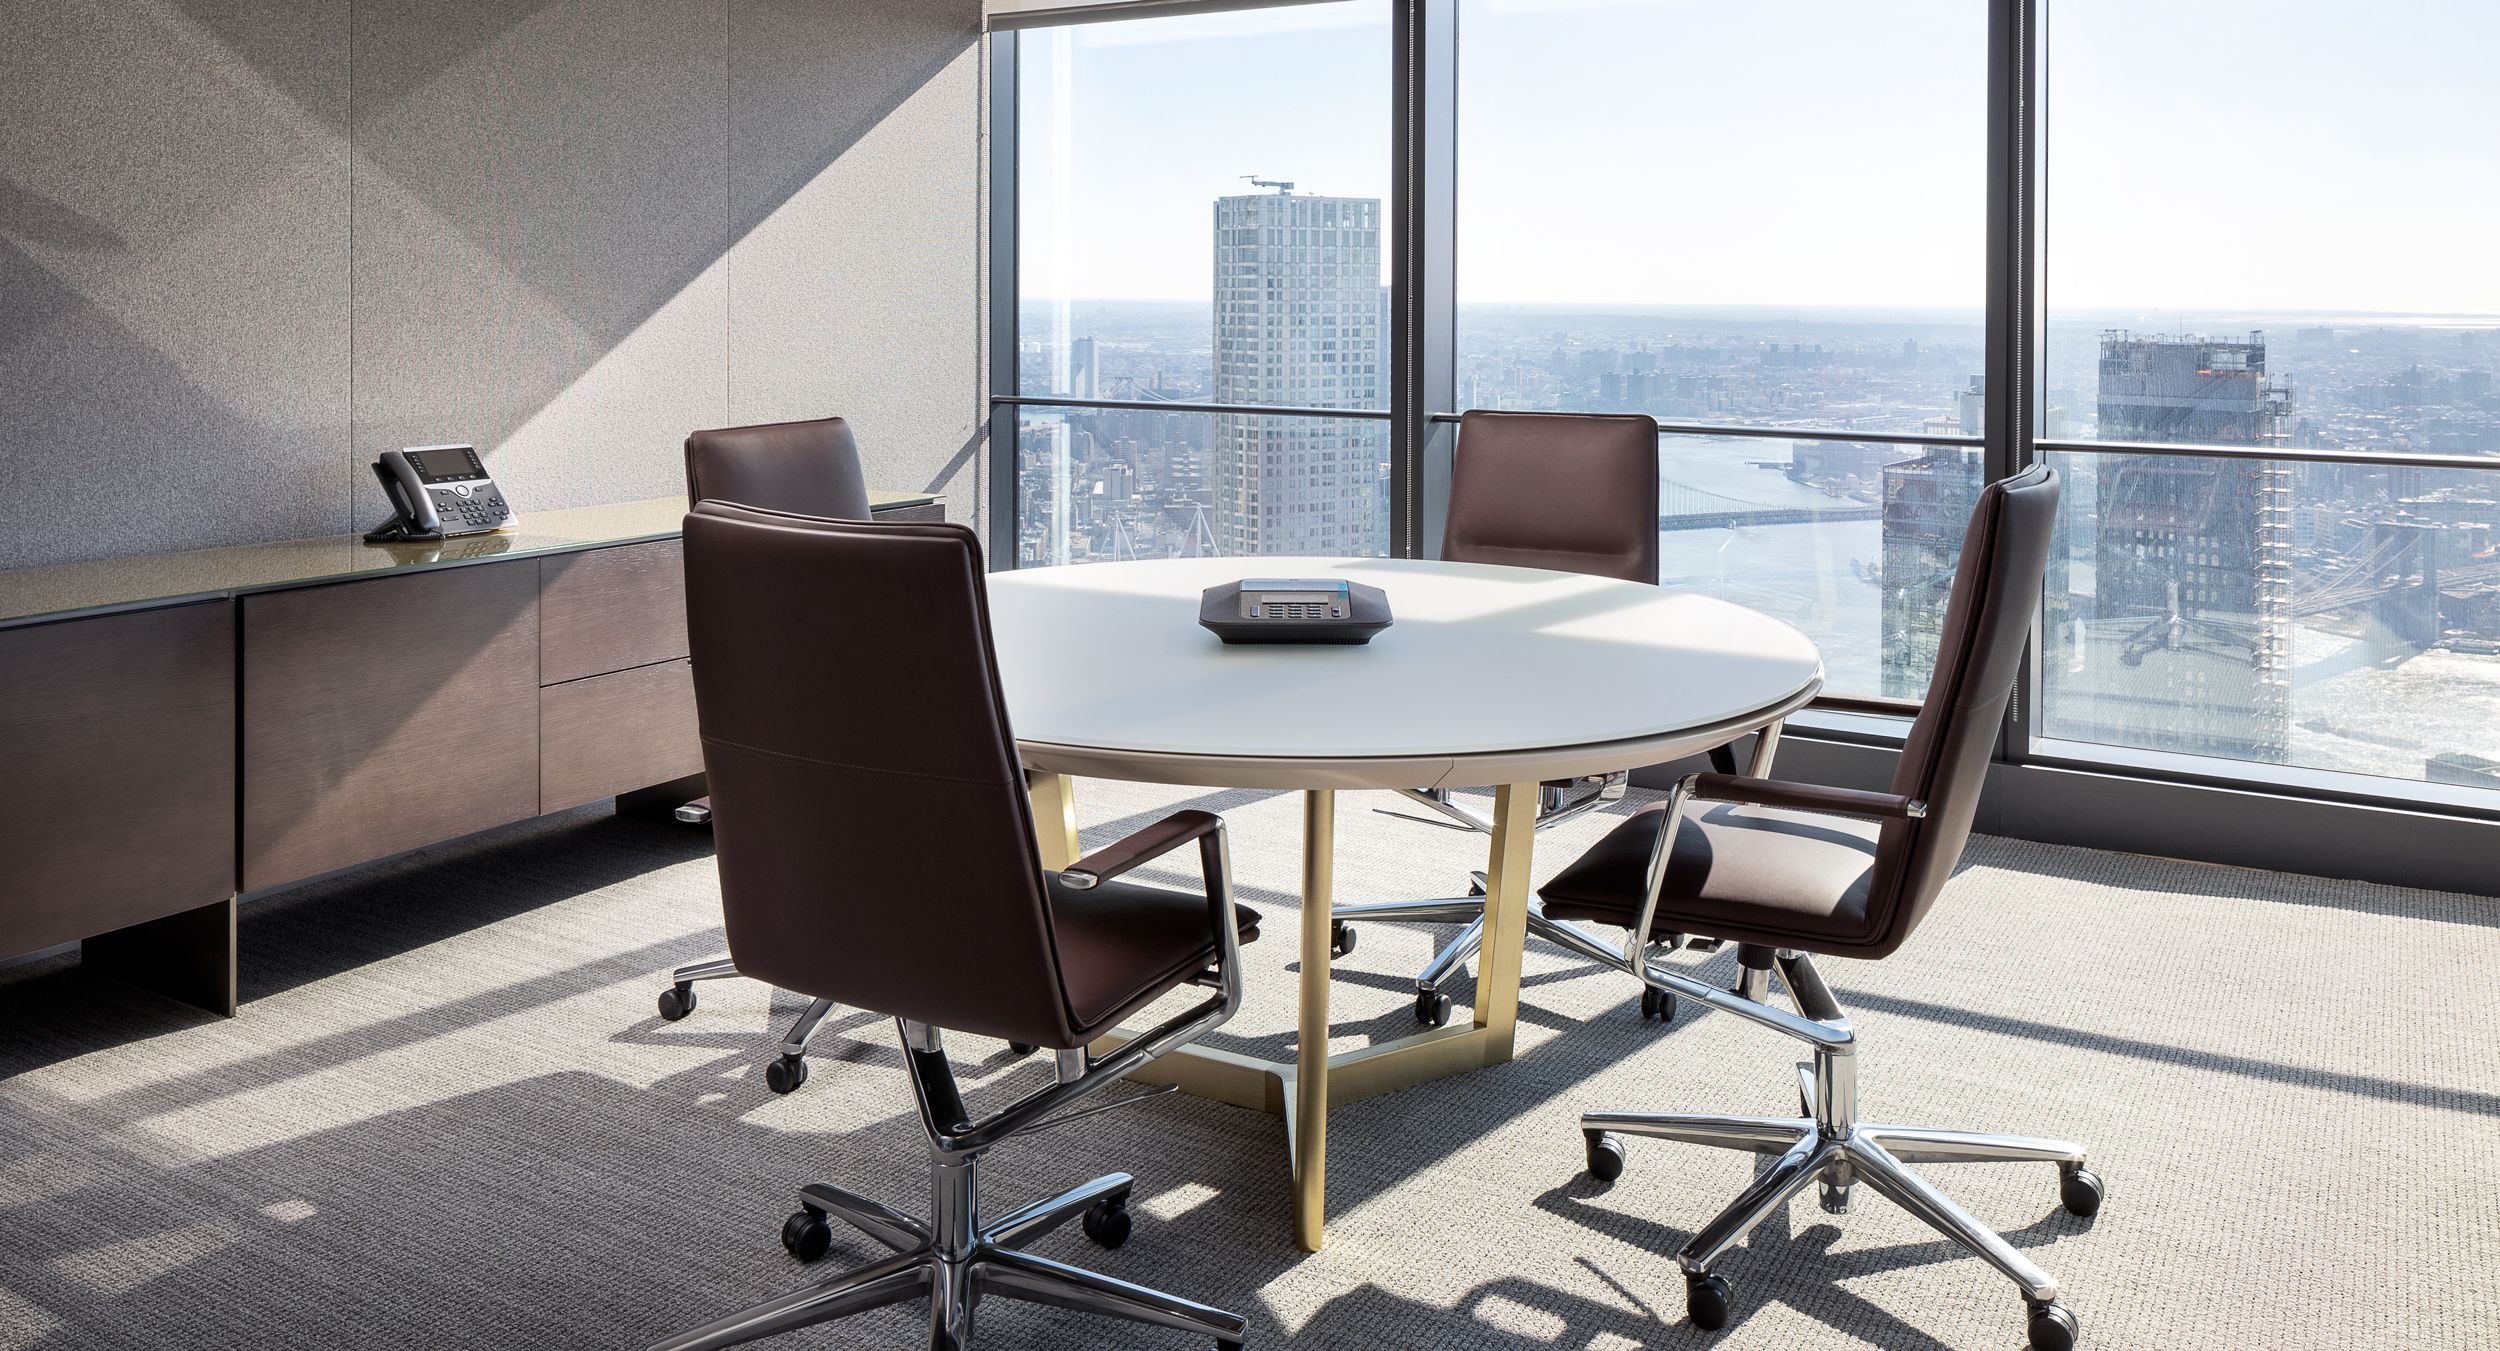 A 60-inch diameter HALO conference table features an etched glass surface with patented HALO soft edge and Brushed Brass base.